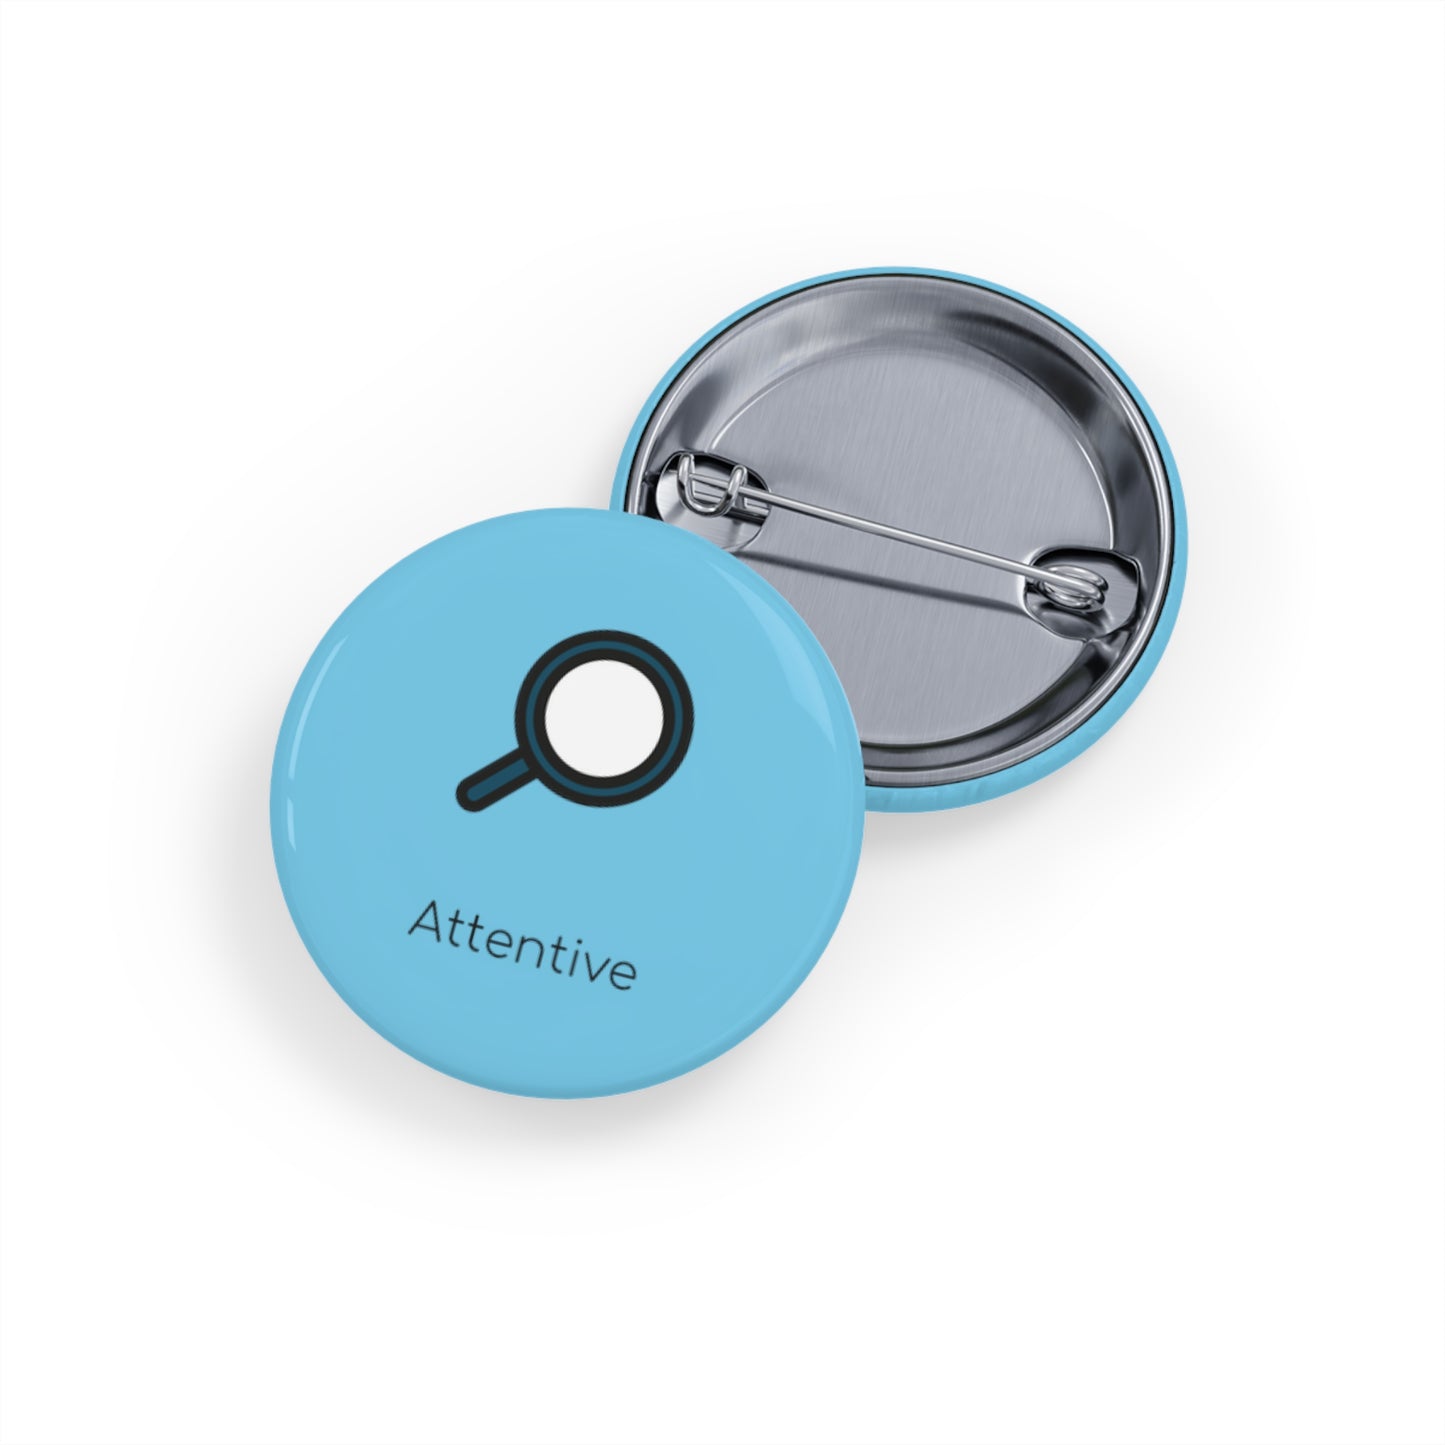 Round Pin Badge (Attentive)